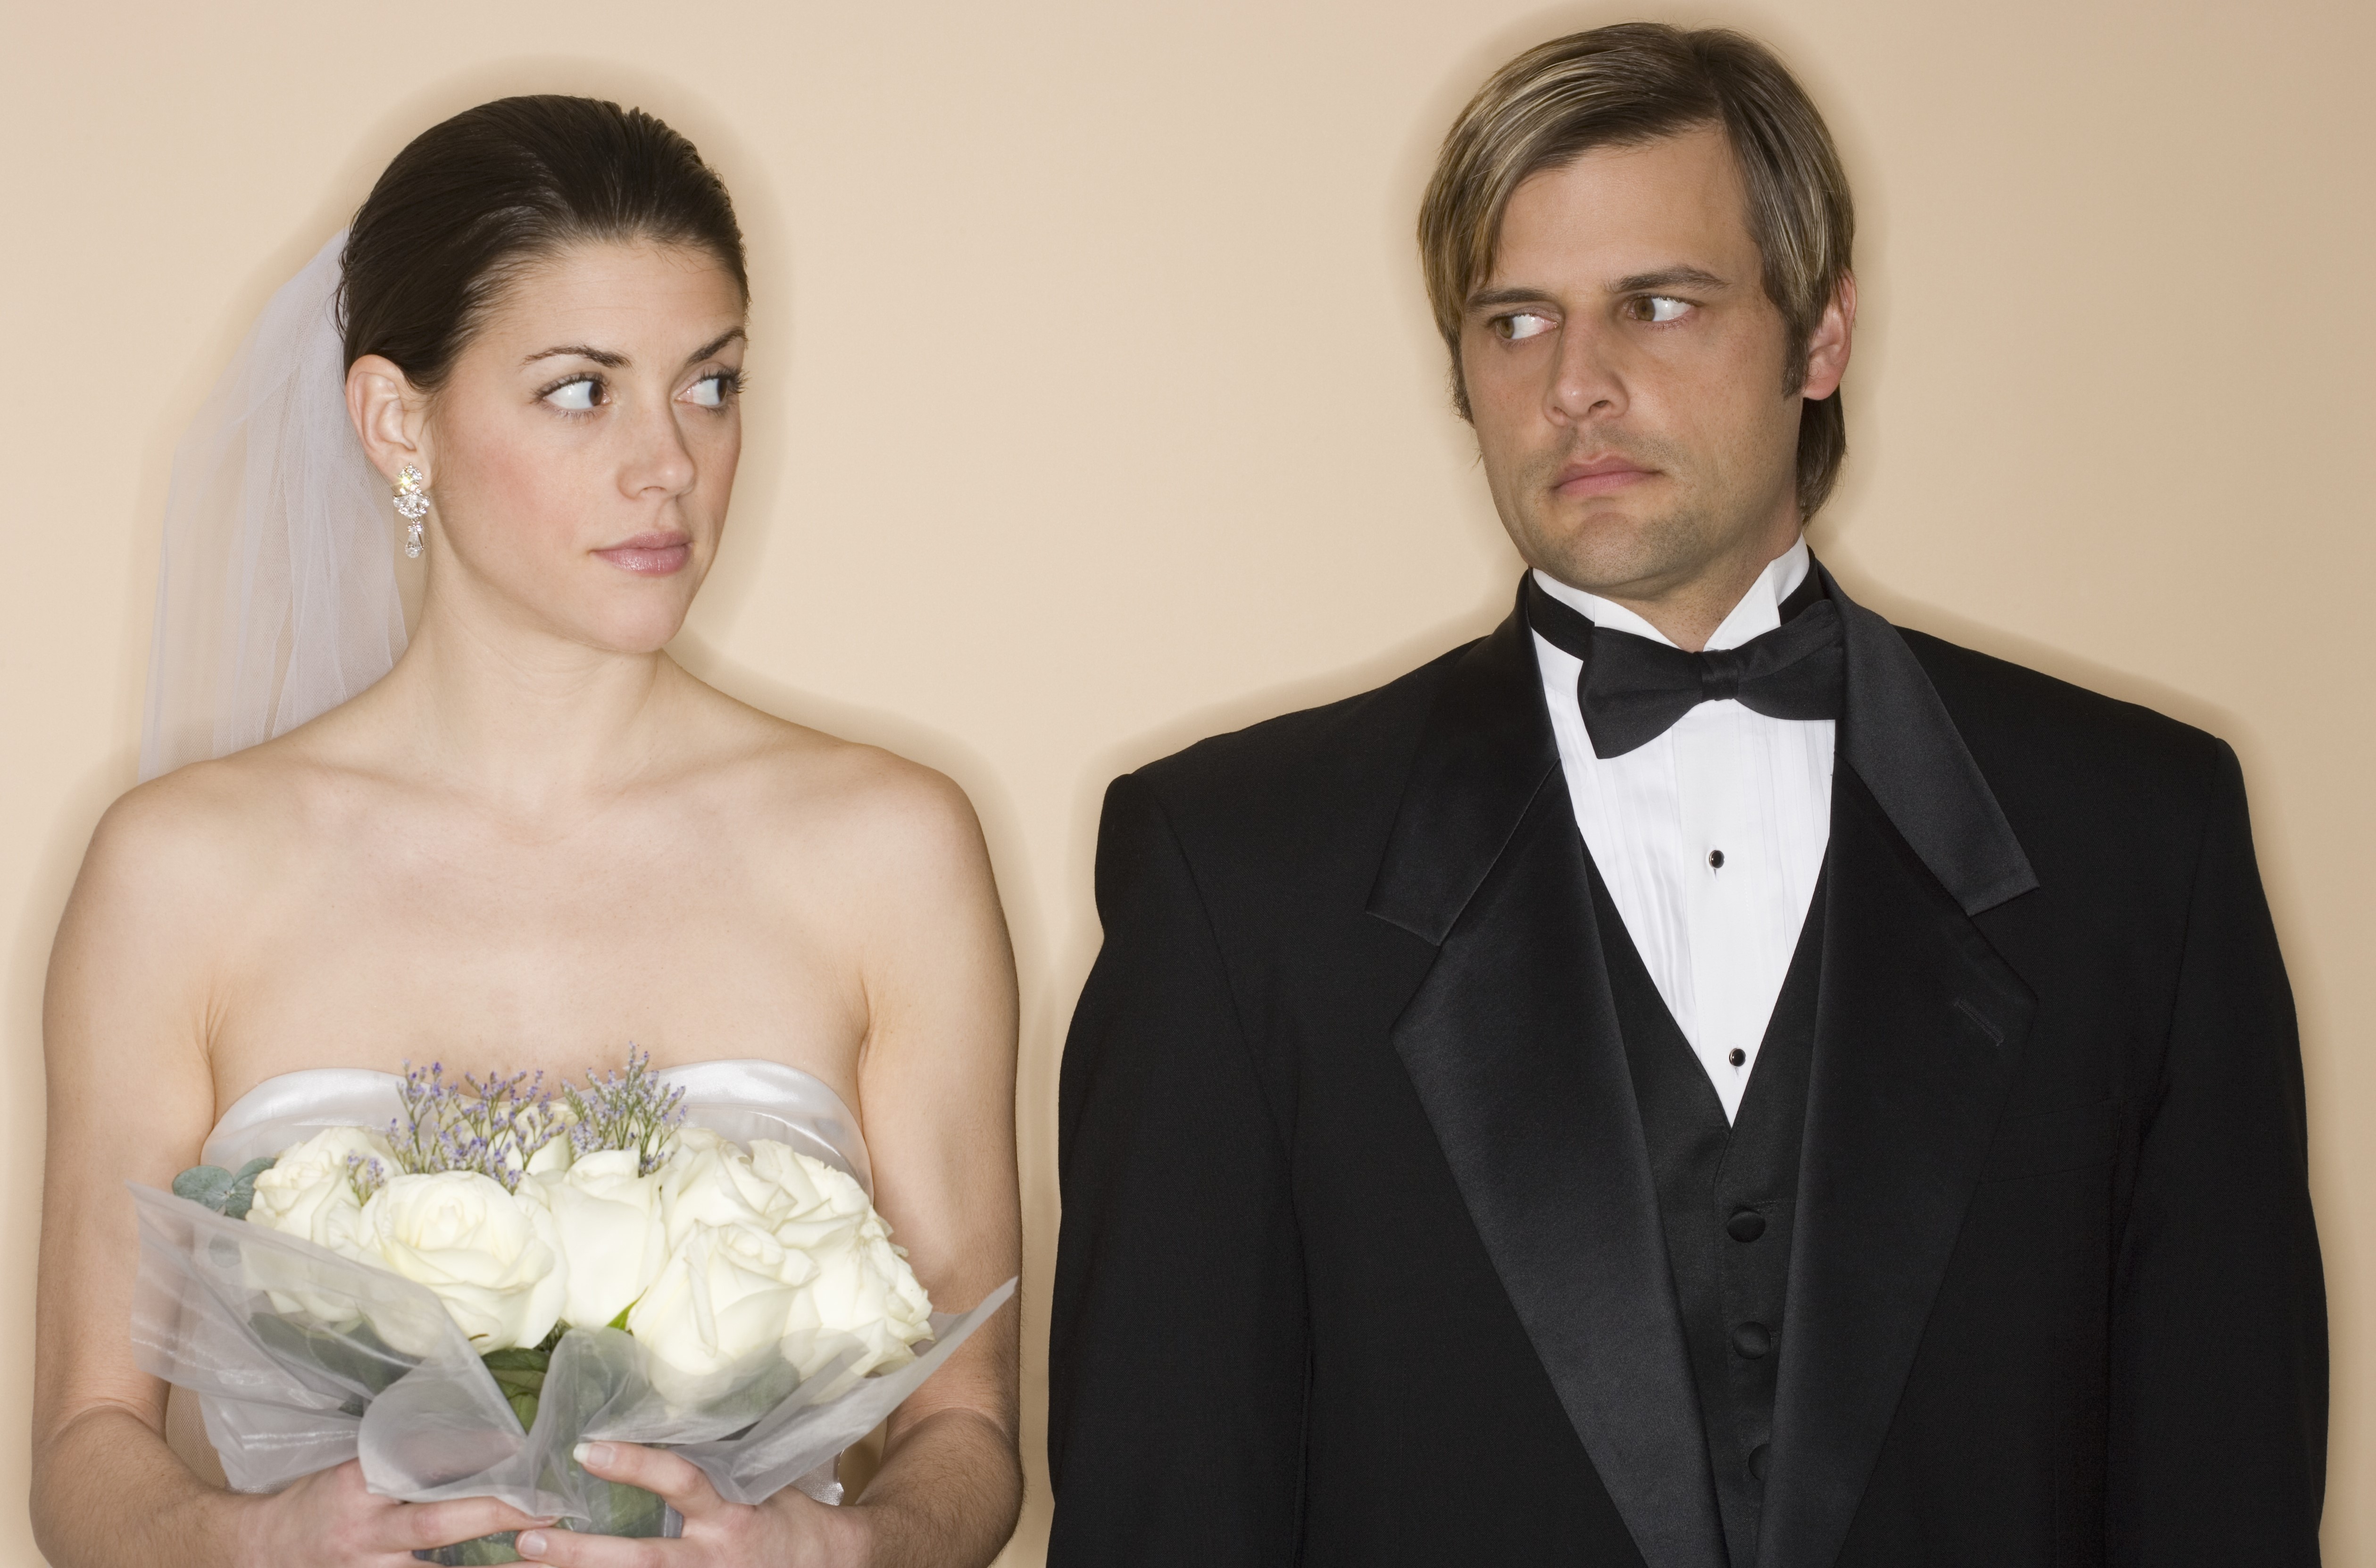 Angry groom with his bride | Source: Getty Images